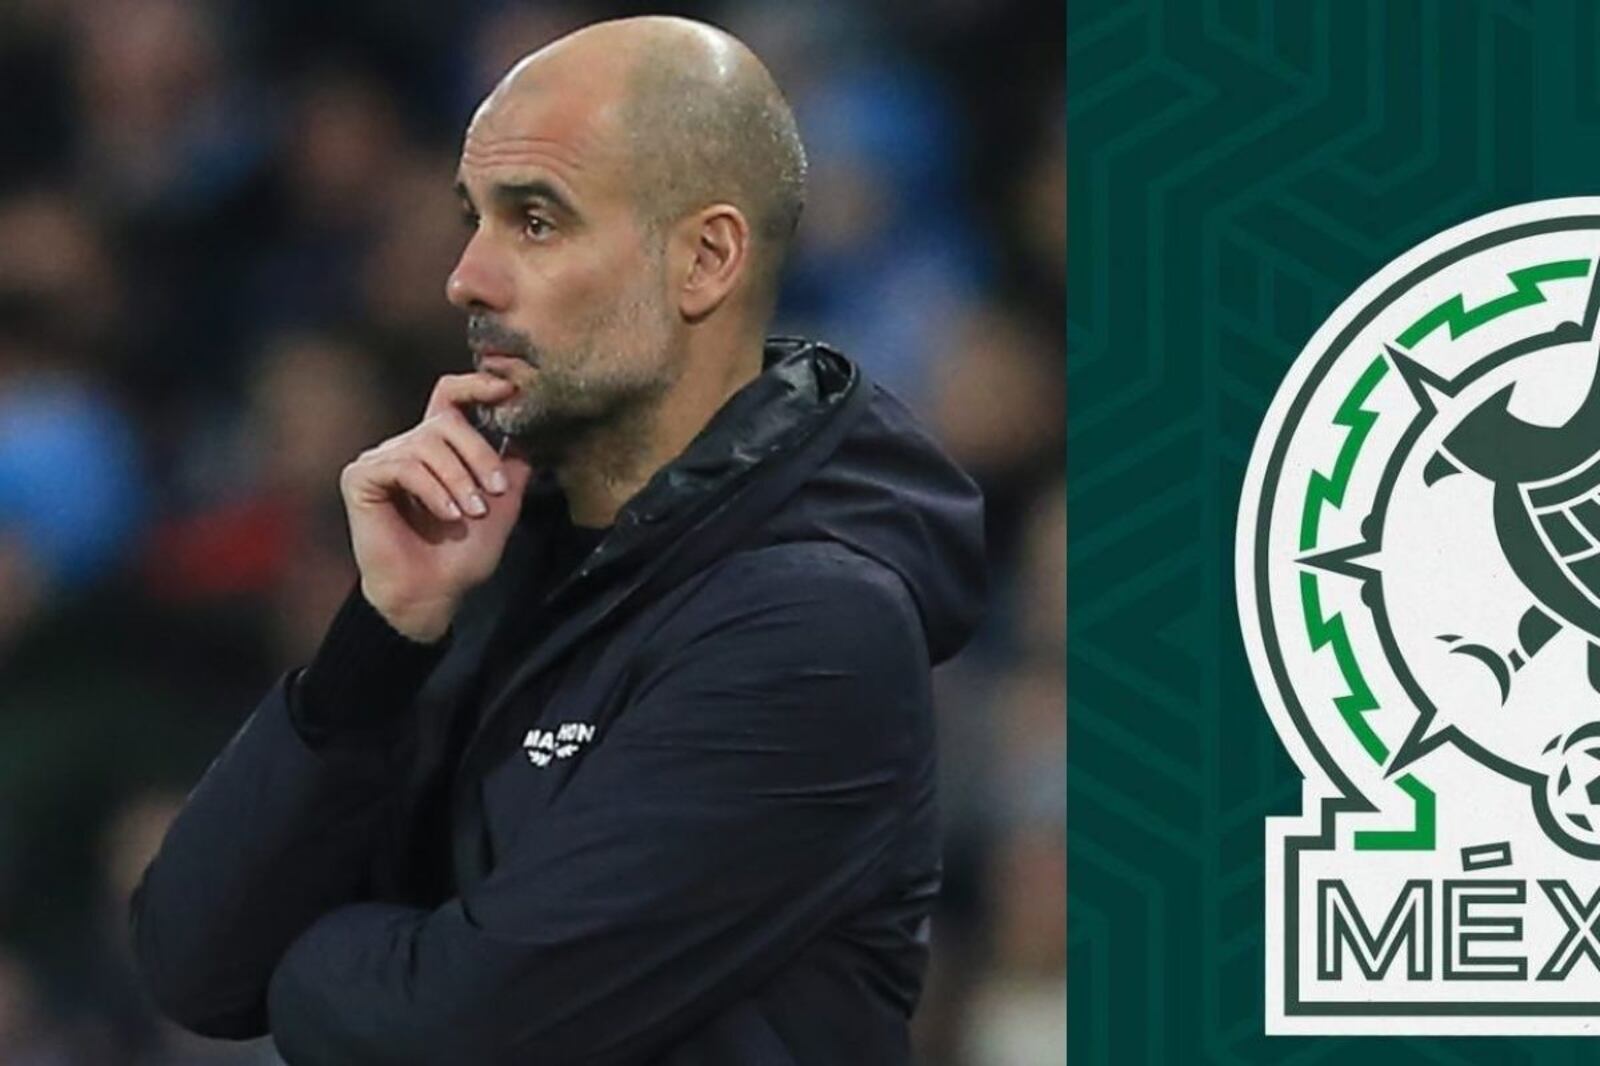 Welcome to Mexico, Pep Guardiola's decision surprises Manchester City